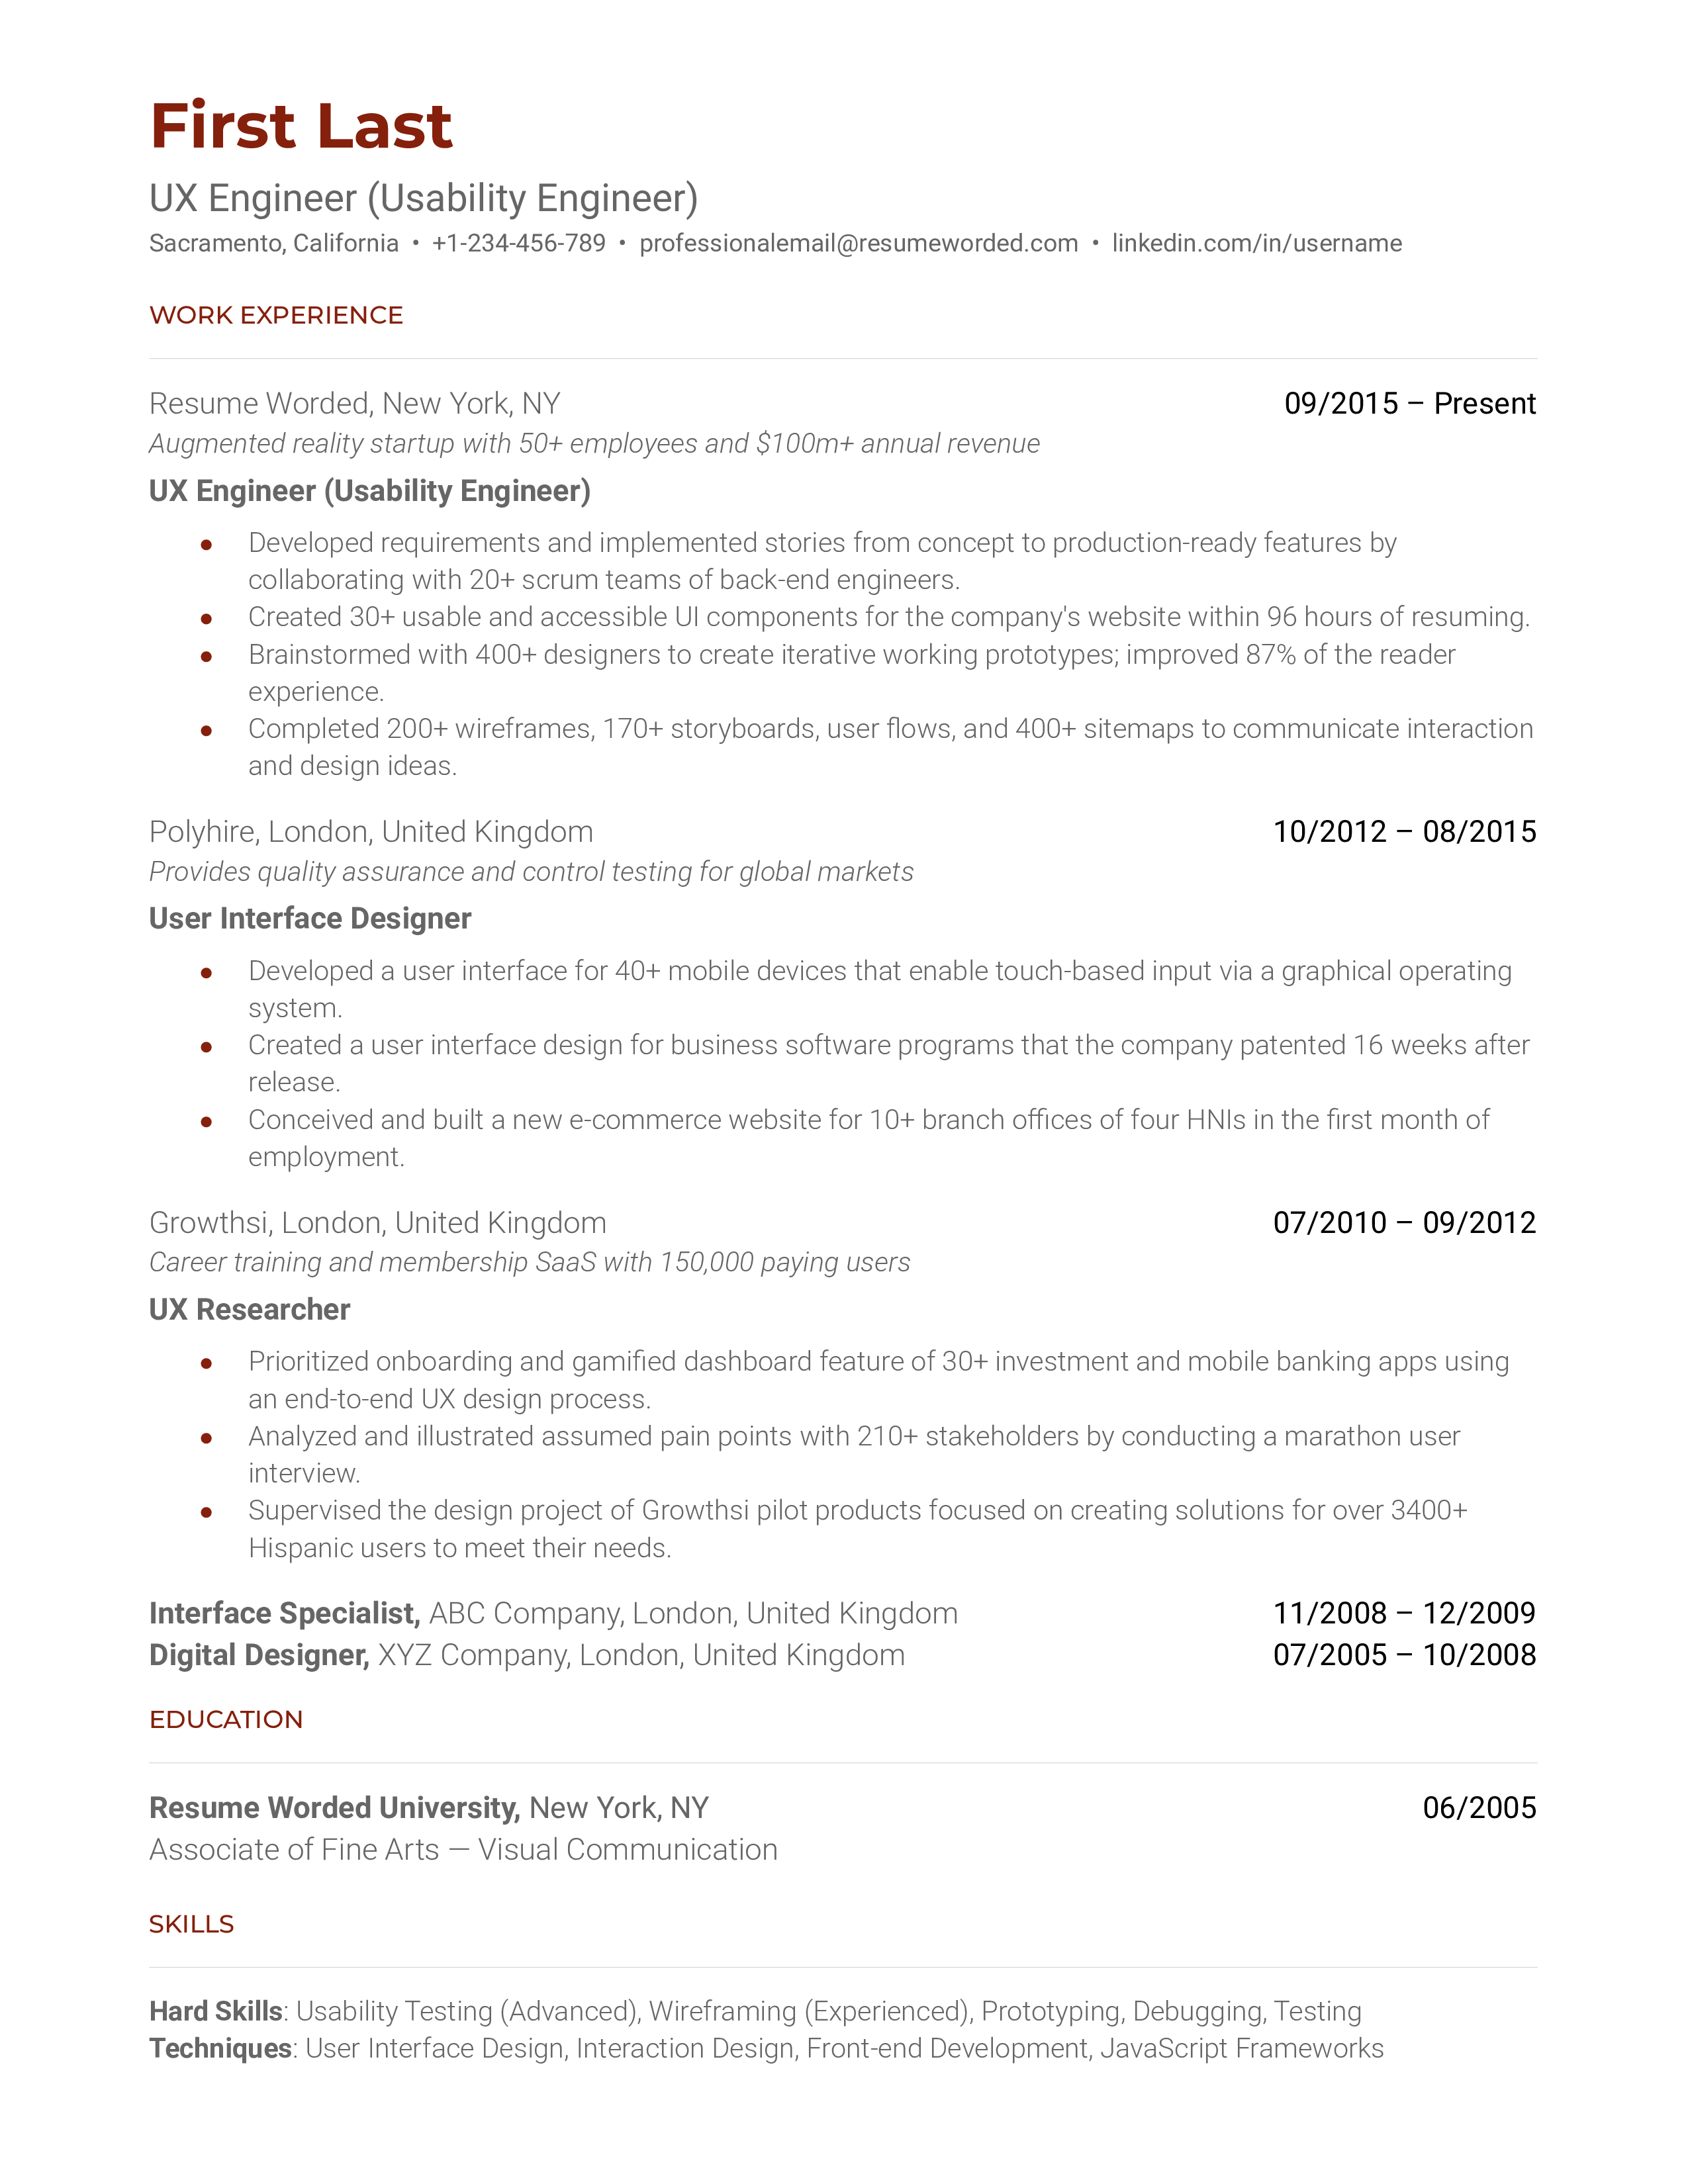 A UX Engineer CV highlighting technical skills and project experiences.